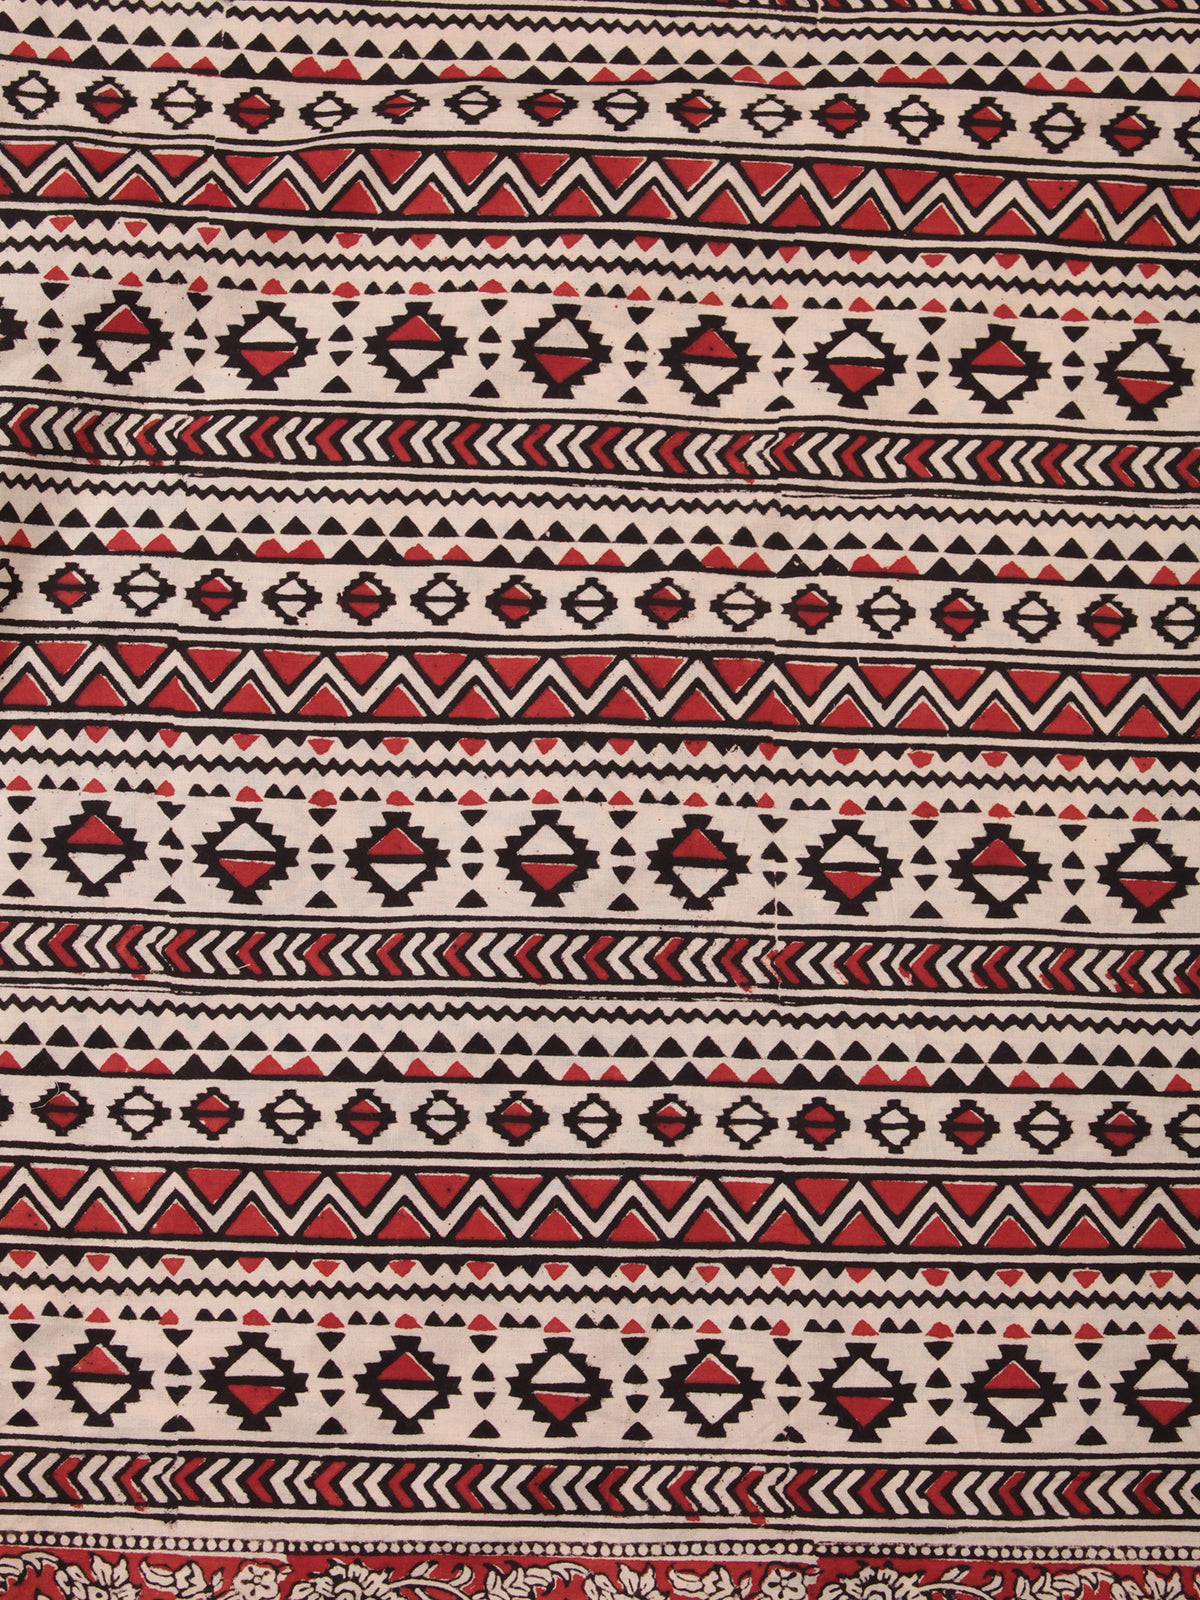 OffWhite Red Black Hand Block Printed Cotton Fabric Per Meter - F001F2452